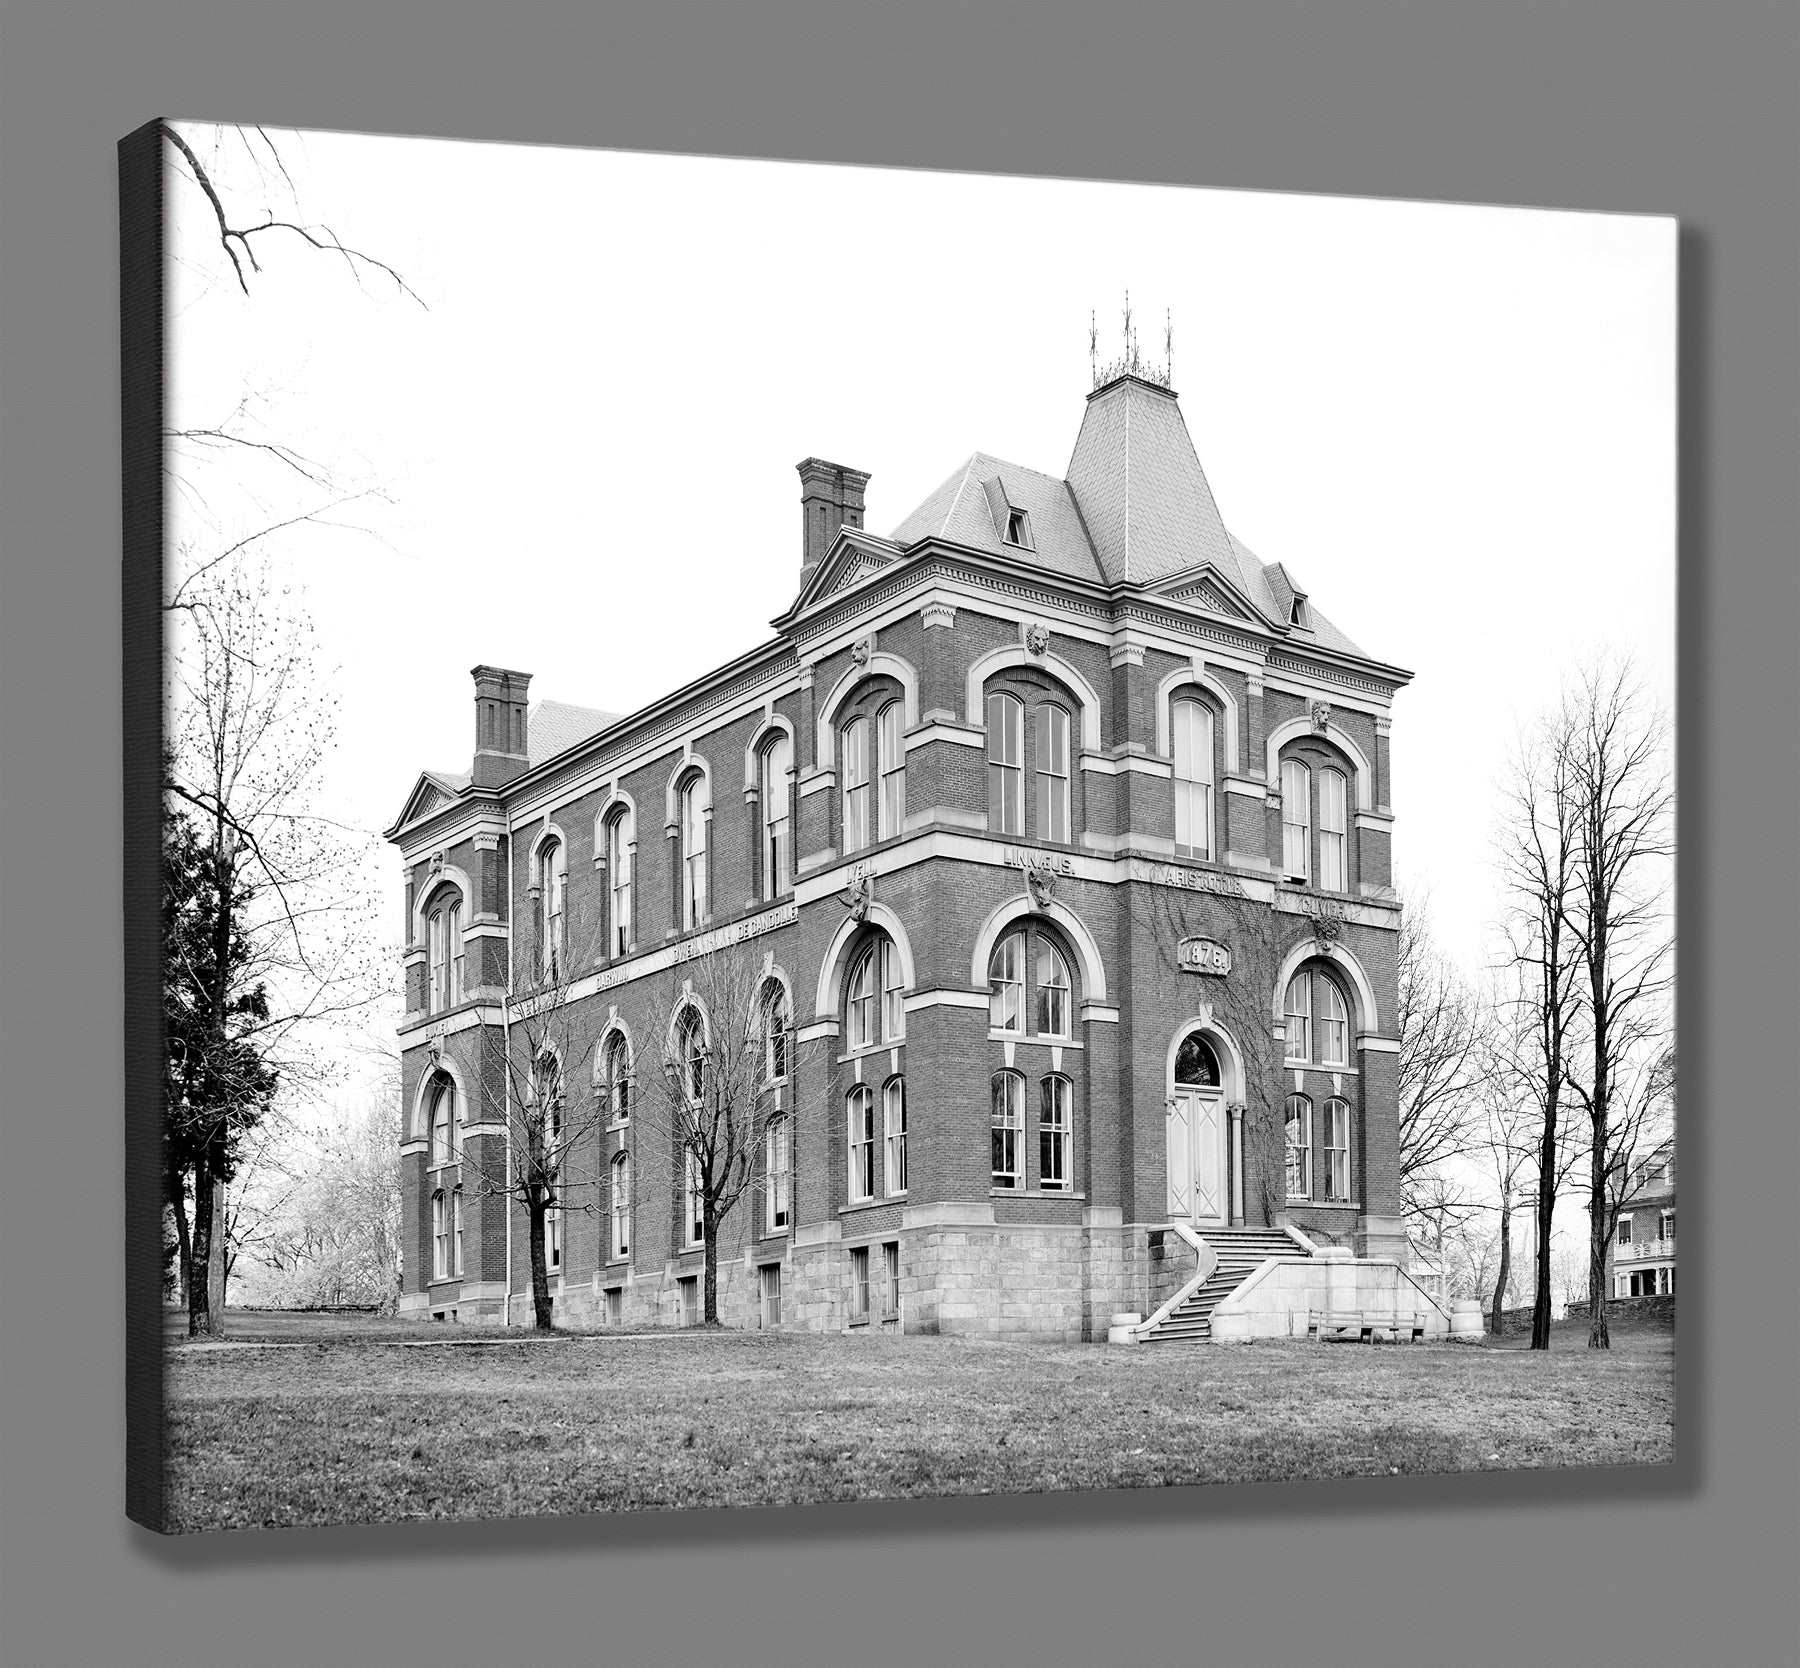 A mockup of a canvas print of a vintage image of the Brooks Museum at the University of Virginia